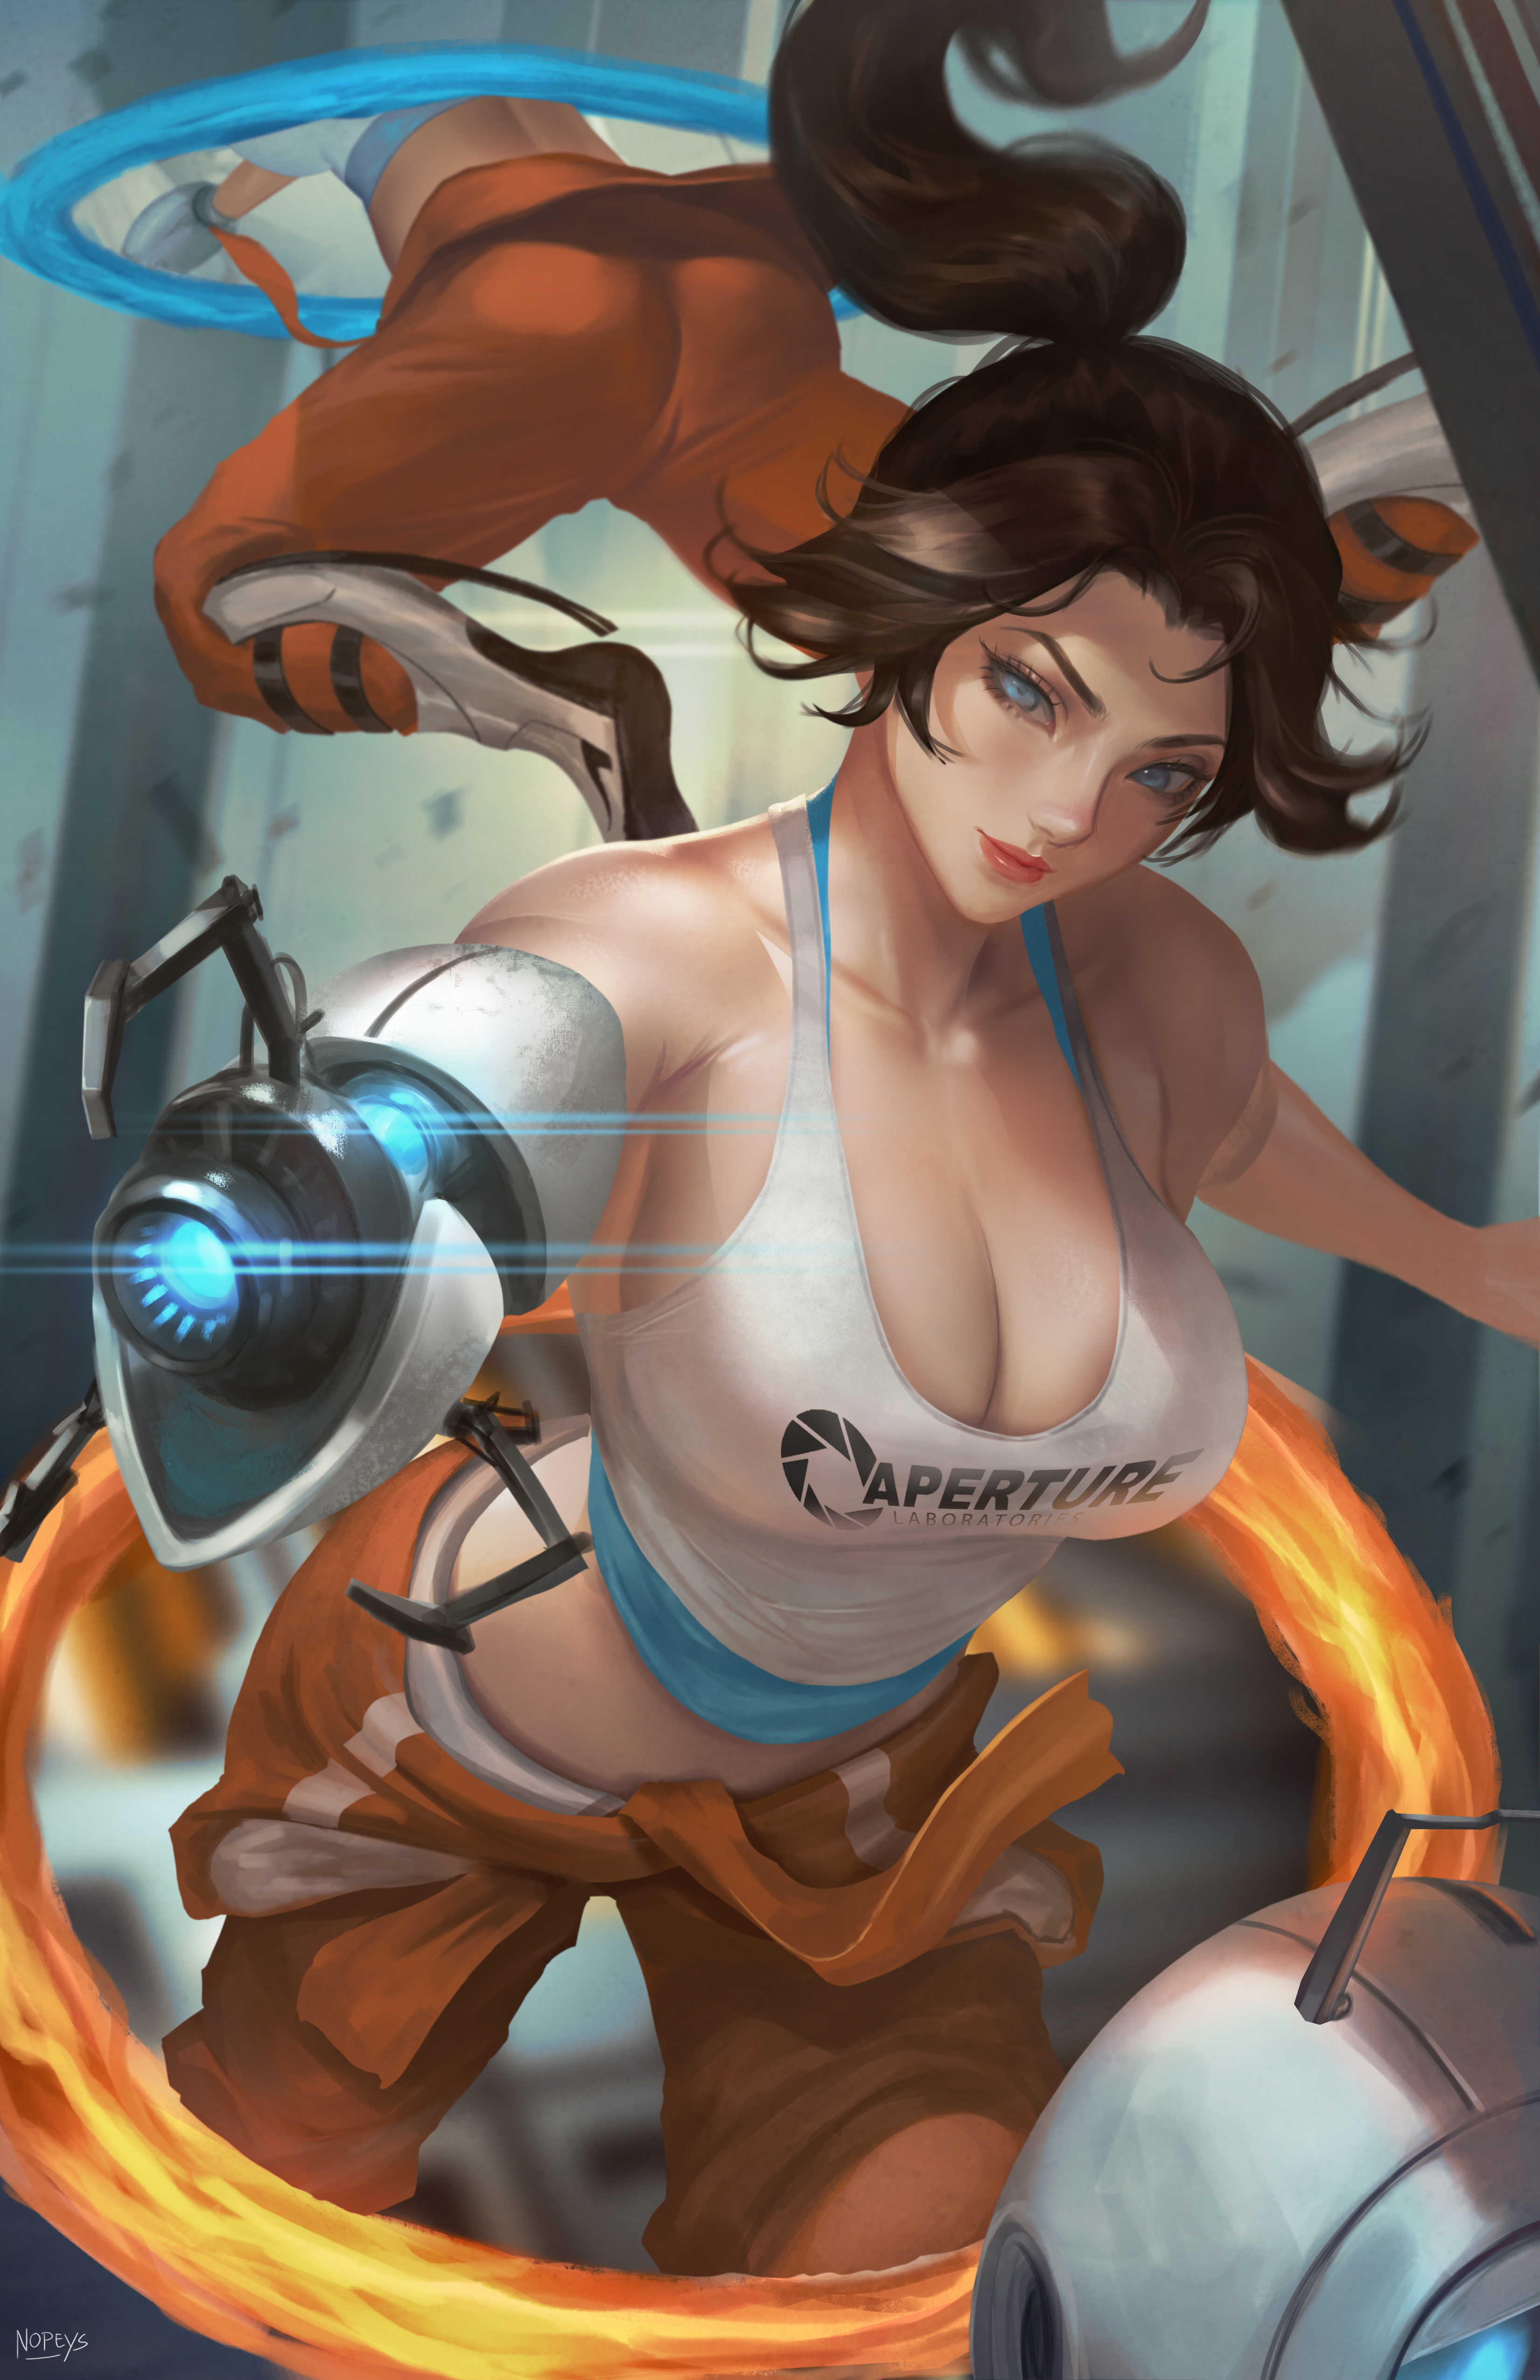 General 3300x5100 Chell Portal (game) video games video game girls brunette video game characters tank top cleavage overalls fantasy girl ponytail 2D artwork drawing fan art Nopeys blue eyes Valve Corporation Aperture Laboratories GLaDOS Portal Gun